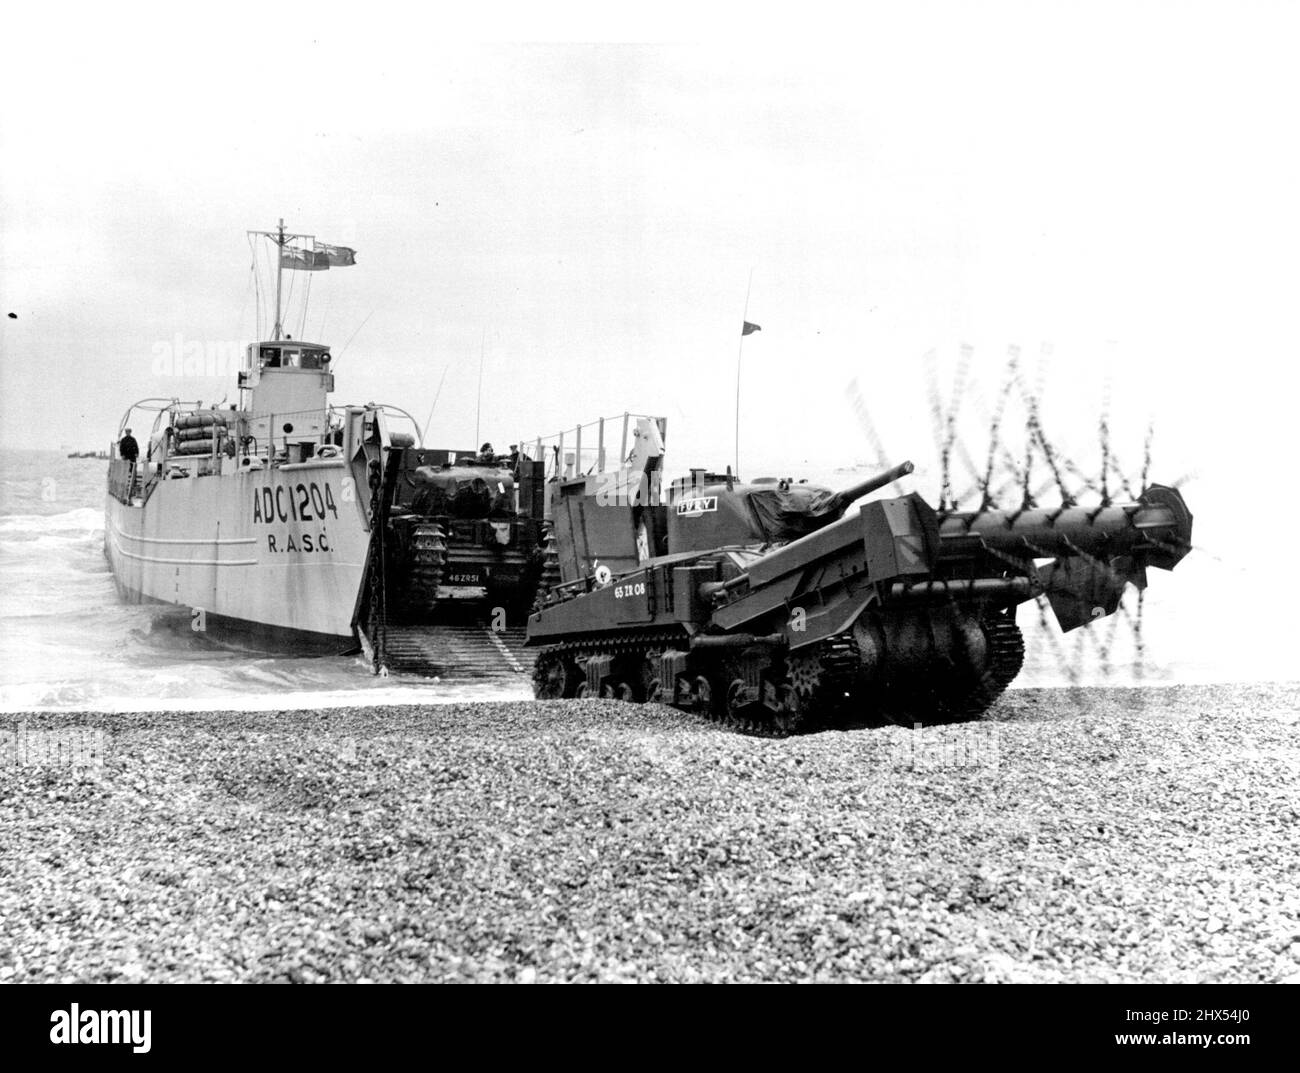 Tanks And Troops Storm South Coast Beaches In Amphibious 'Invasion'.Today in operation Runaground III, 'enemy' forces, consisting of men of the Gloucesters, Royal Marine Commandos, and Hussars with Centurion, Sherman and Caurchlli tanks,stormed the beach at Eastney, near Portsmouth is the biggest combined amphibious exercise since the war. Frognen dropped from a plane led the way, arid support was given to the landing from RAP and; Navy aircraft Helicopters were used for the first time in a landing and the Royal Engineers provided an impressive display of flashes and bangs for atmosphere.Tanks Stock Photo